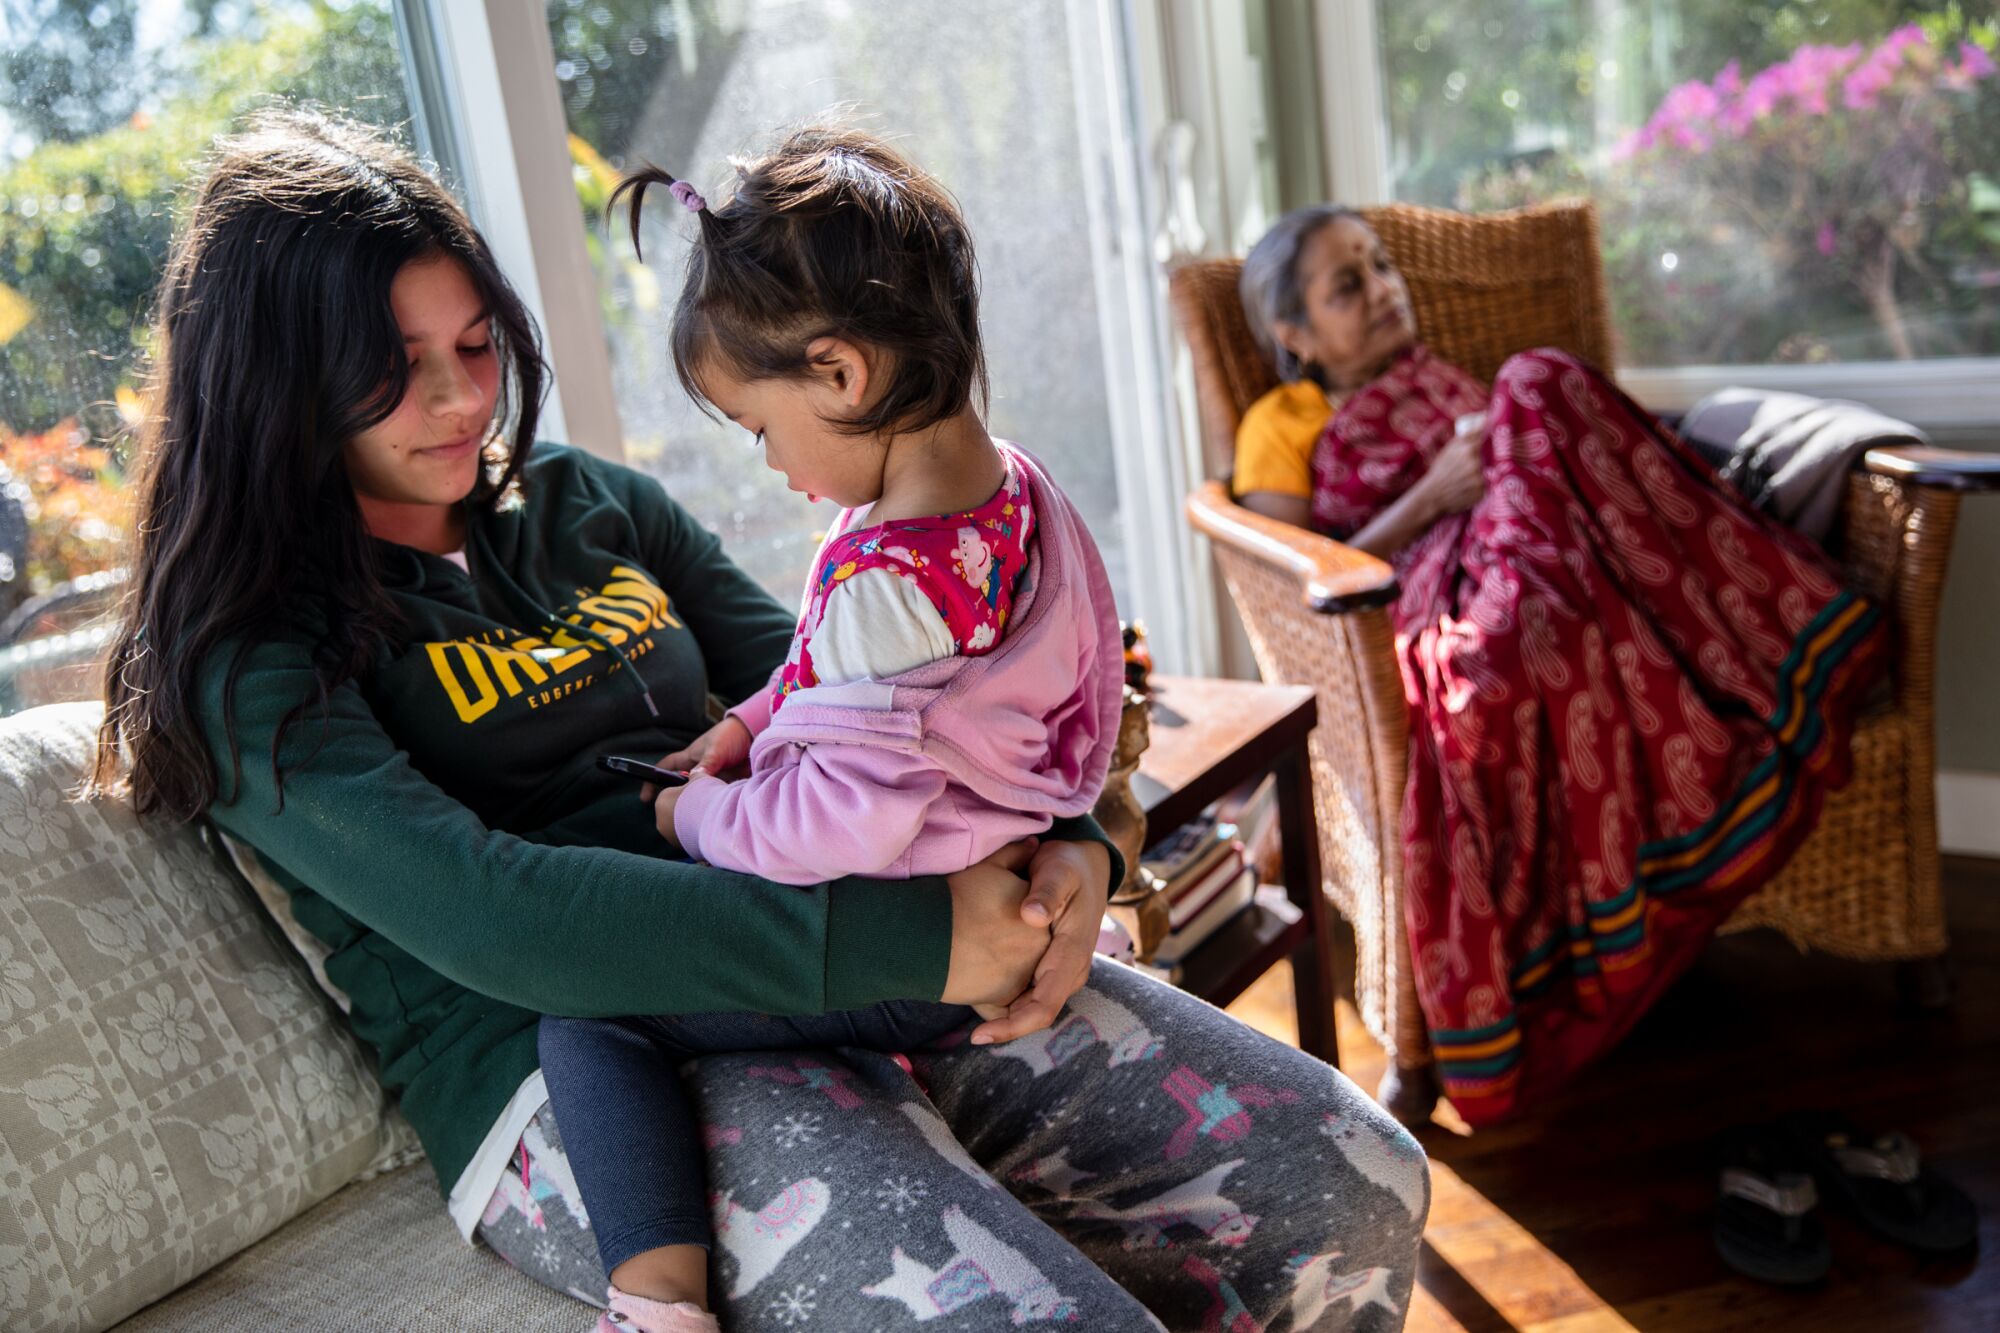 Vishaala Wilkinson holds her 2-year-old sister Lalitha at their home in Del Mar on March 2, 2021.